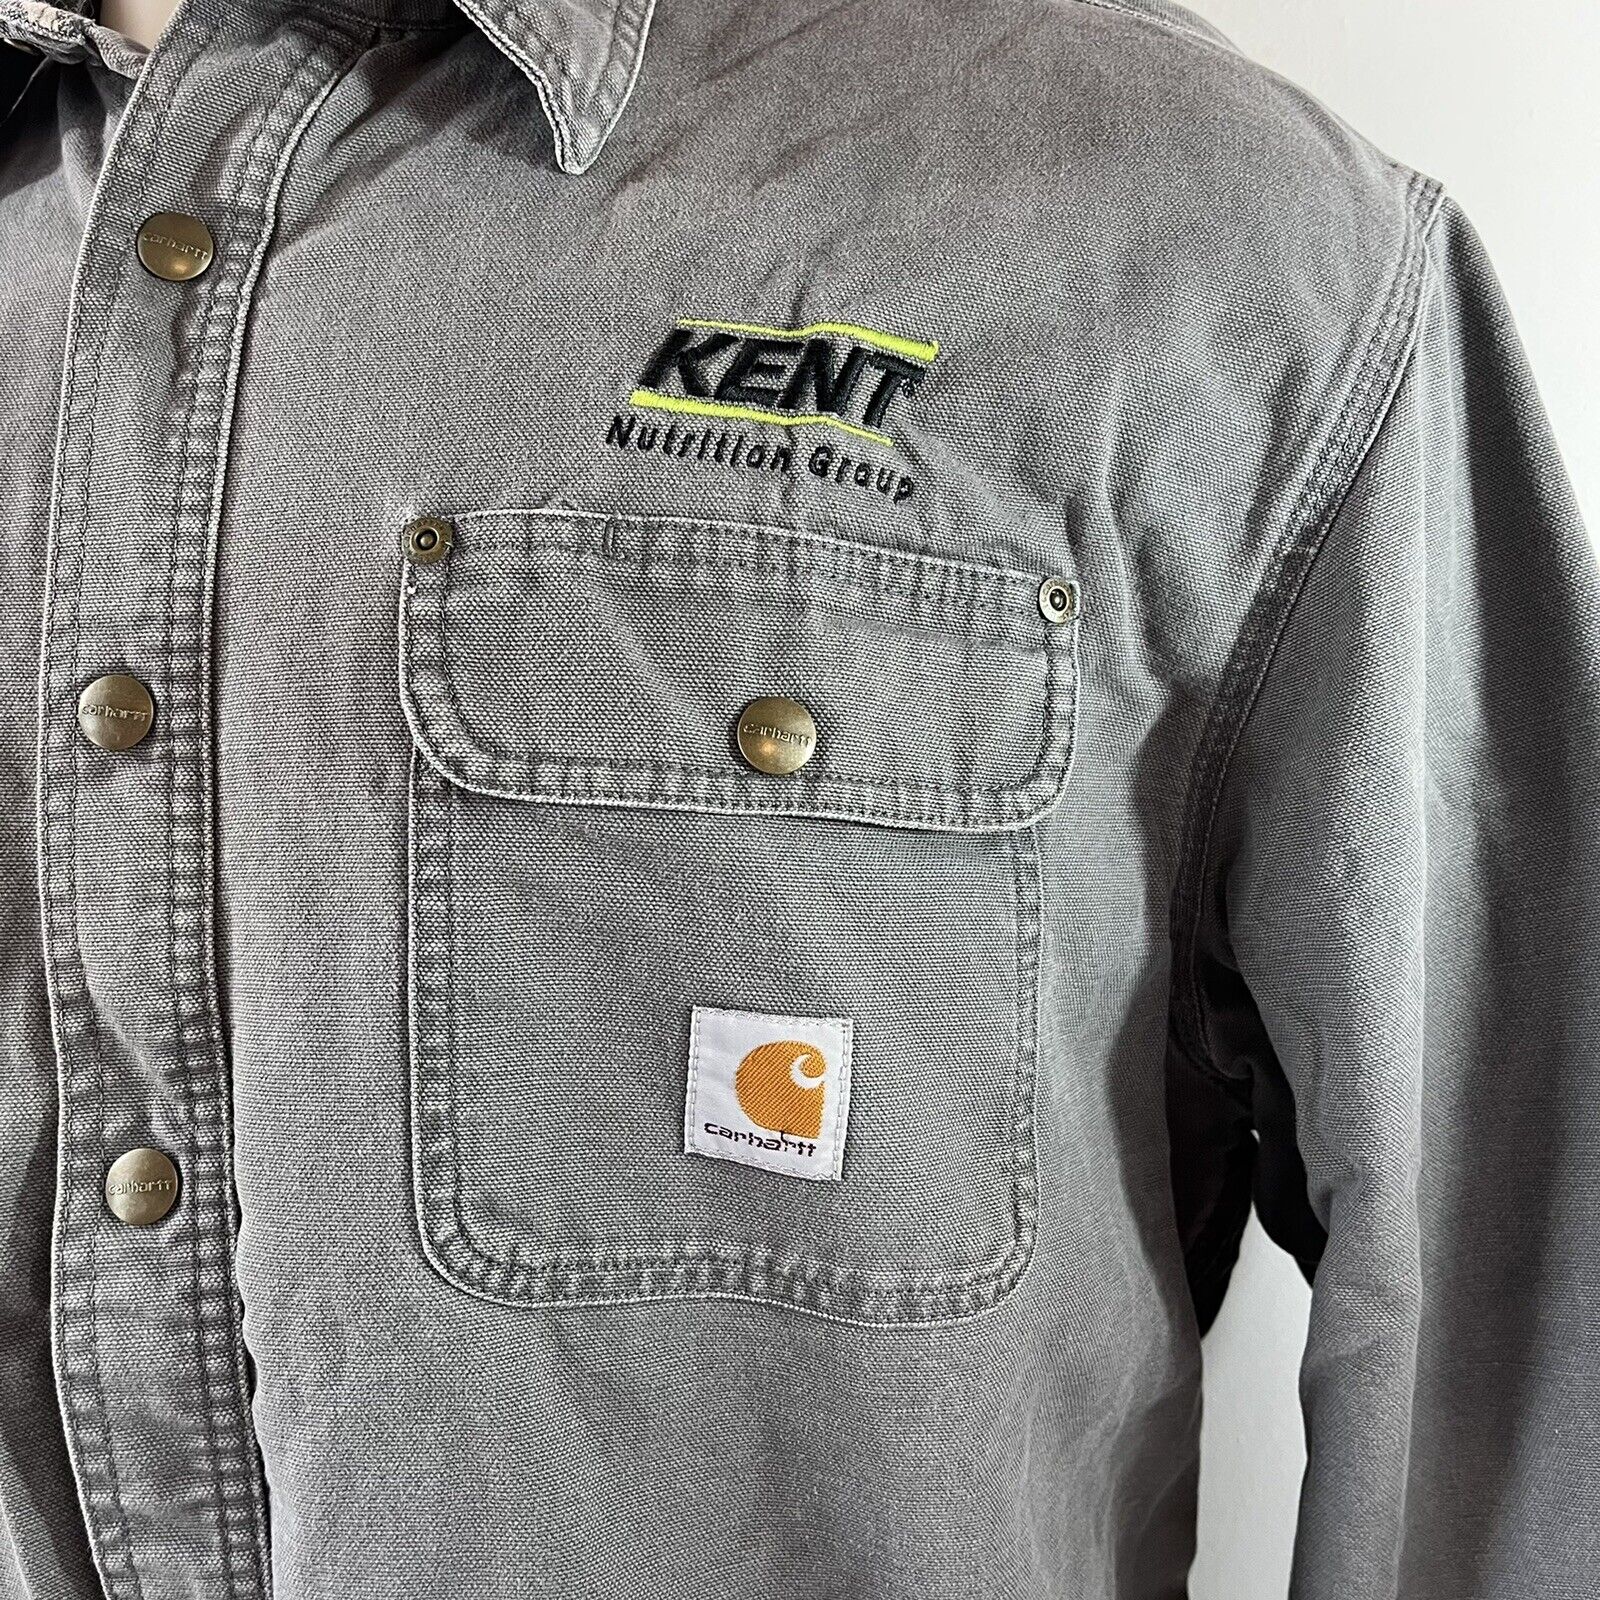 Carhartt Canvas Shirt Jacket Gray Flannel Lined S… - image 3